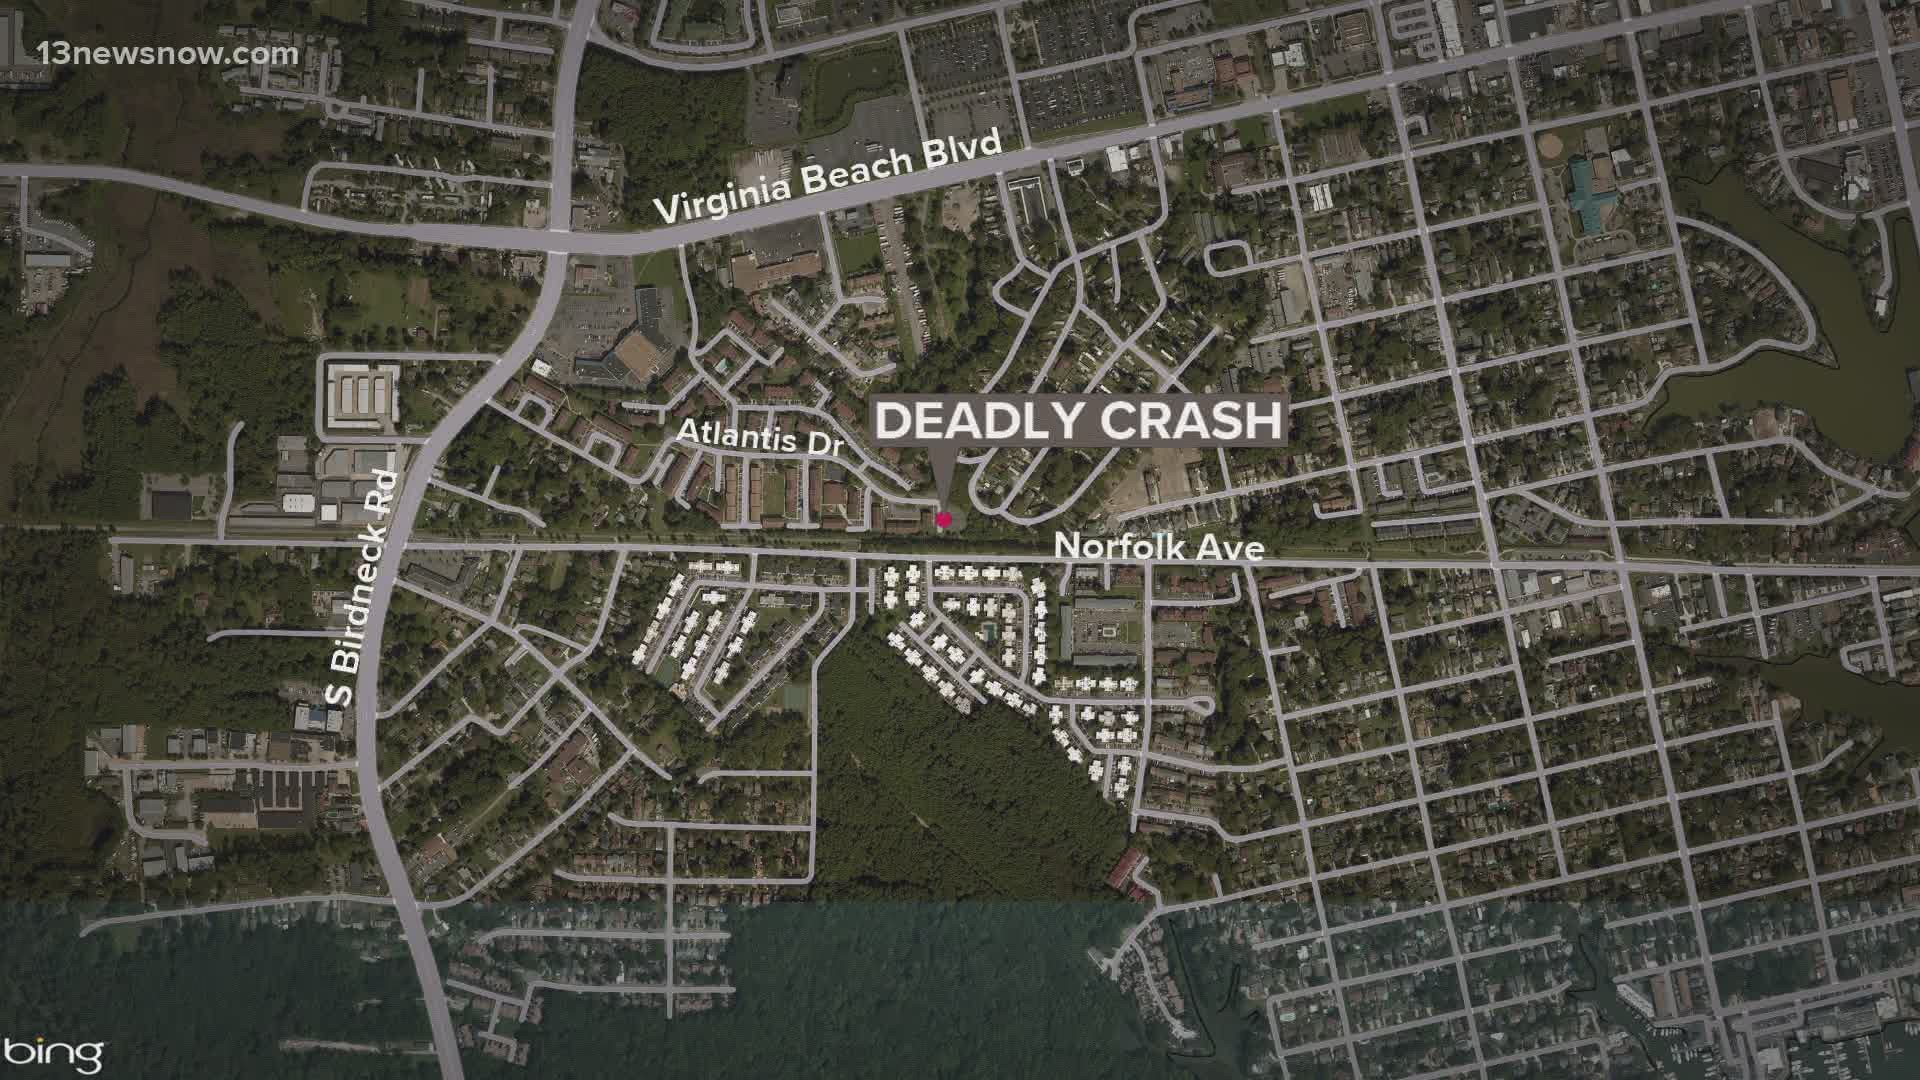 Police say a man died after losing control of his motorcycle on Atlantis Drive Monday night.